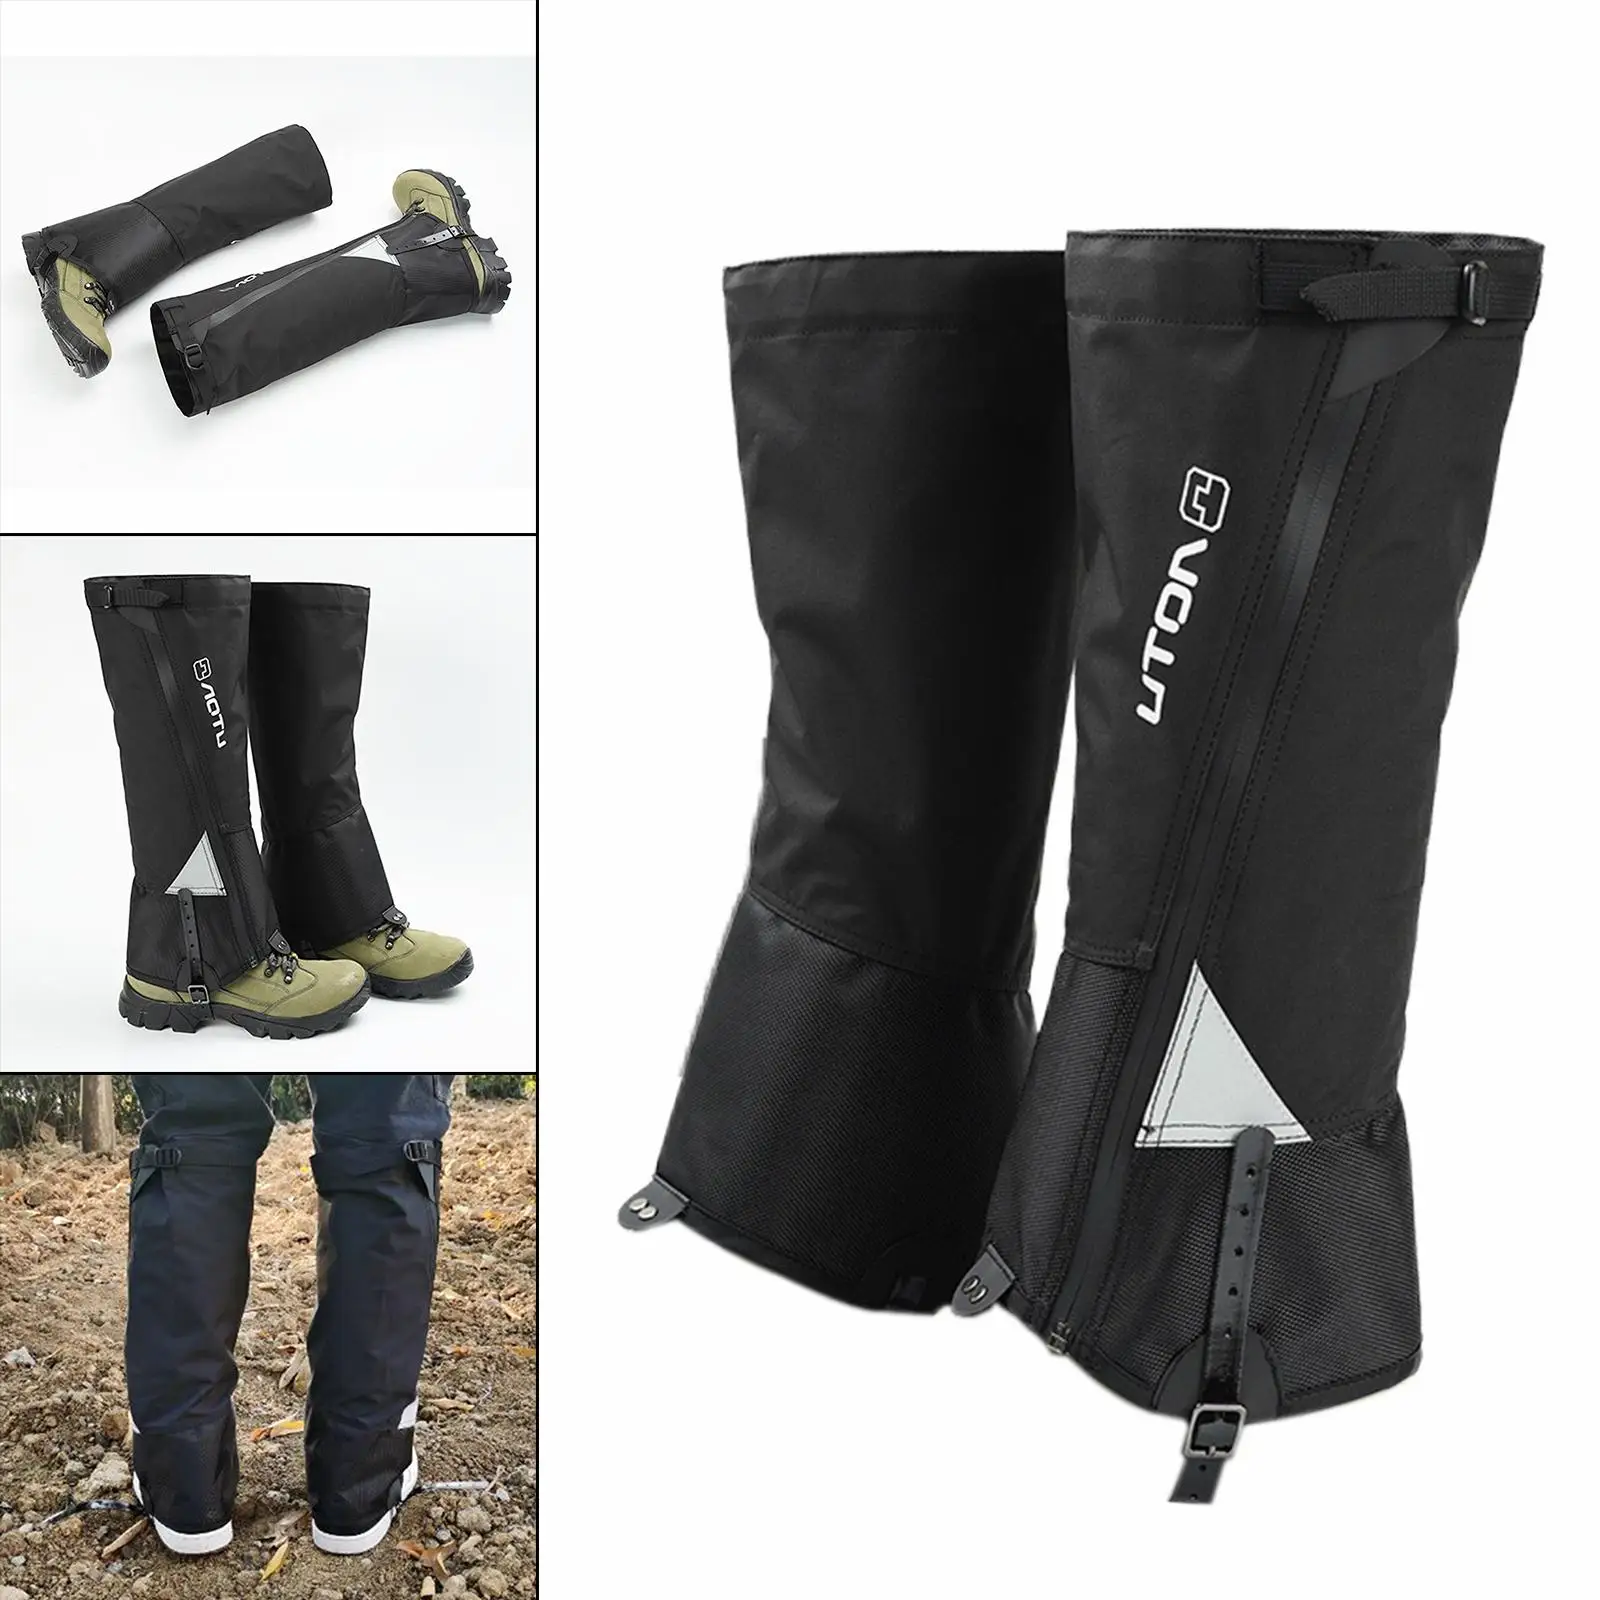 Adjustable Leg Gaiters Waterproof Snowproof Durable Cover for Climbing Outdoor Sports